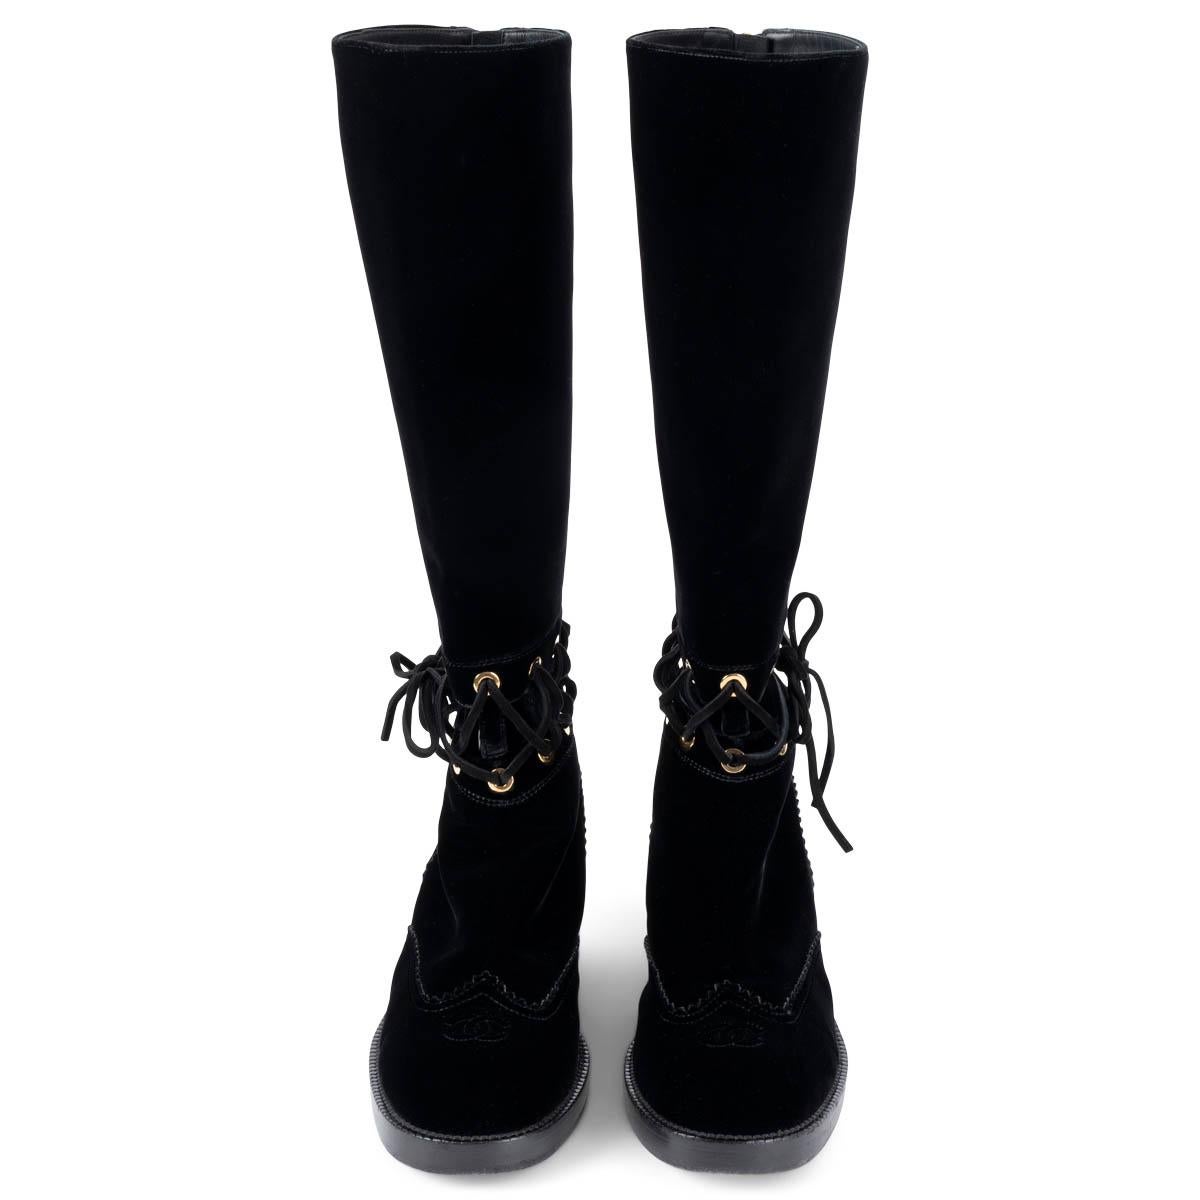 100% authentic Chanel 2016 interlocking cut-out knee-high riding boots in black velvet and leather. The design features a cut-out with suede laces, gold-tone hardware and a stacked block heel. Opens with a zipper on the back. Have been worn and are